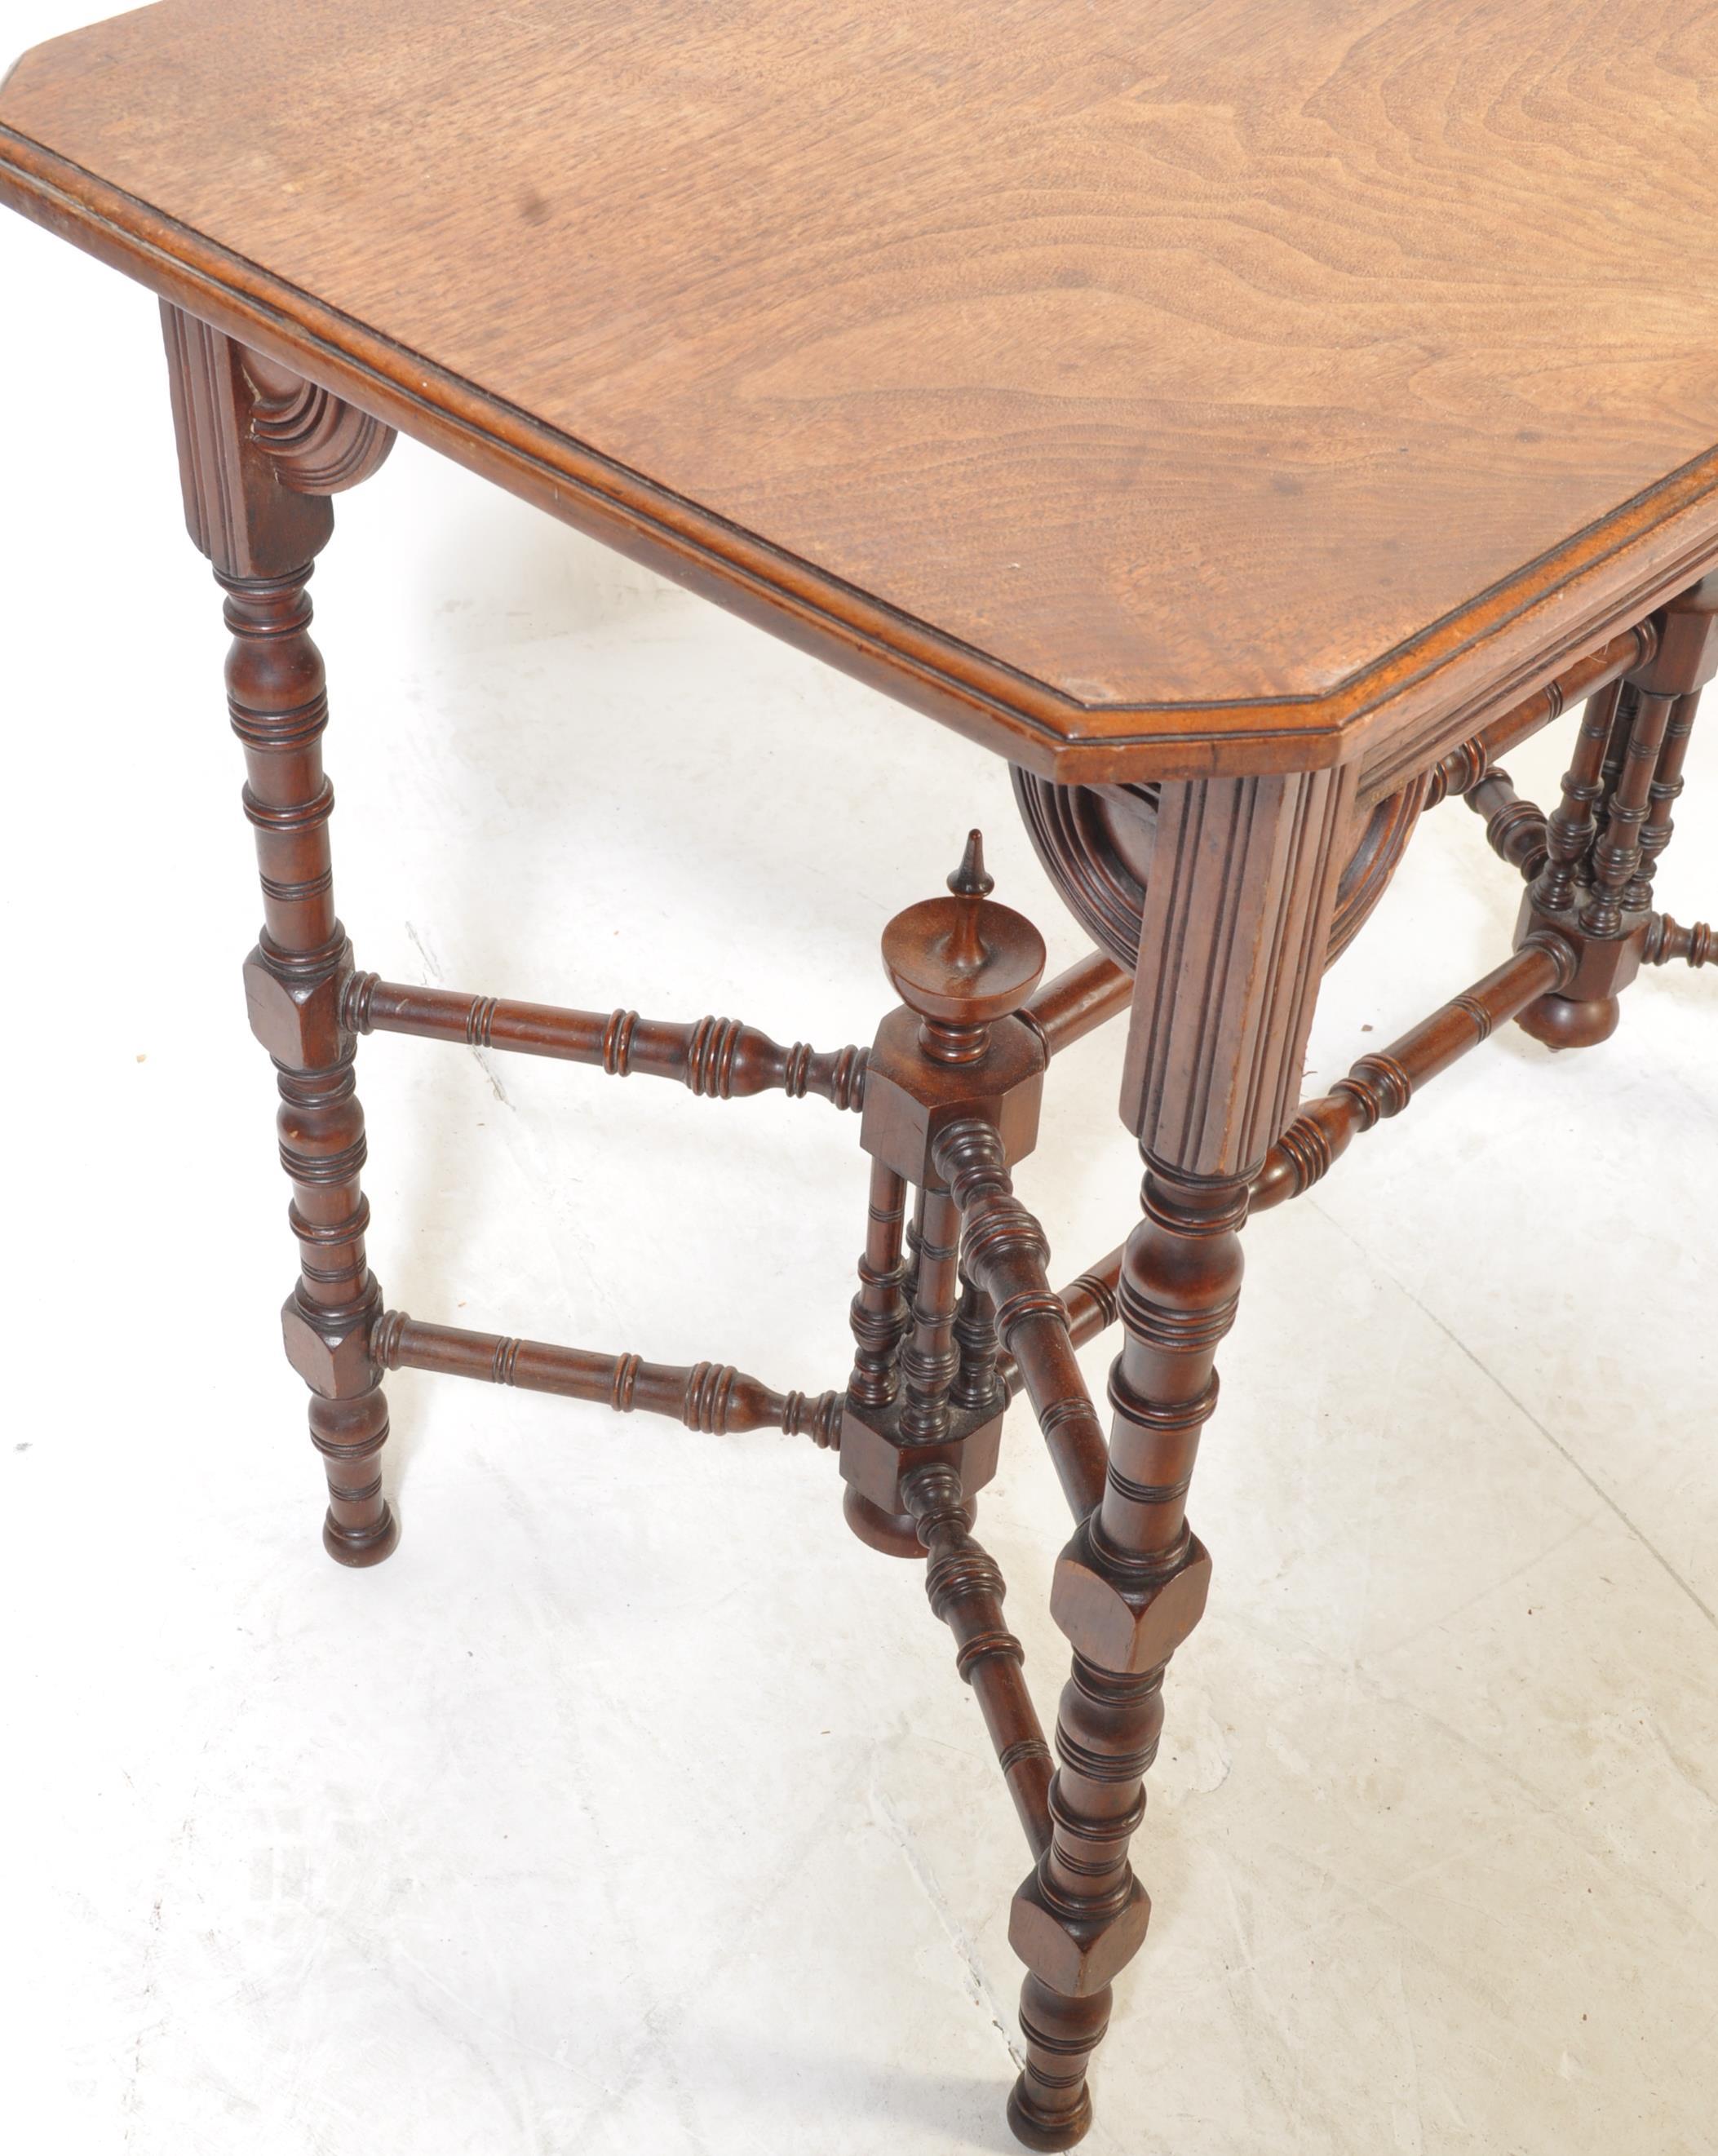 19TH CENTURY VICTORIAN AESTHETIC MOVEMENT HALL TABLE IN THE MANNER OF E W GODWIN - Image 4 of 4